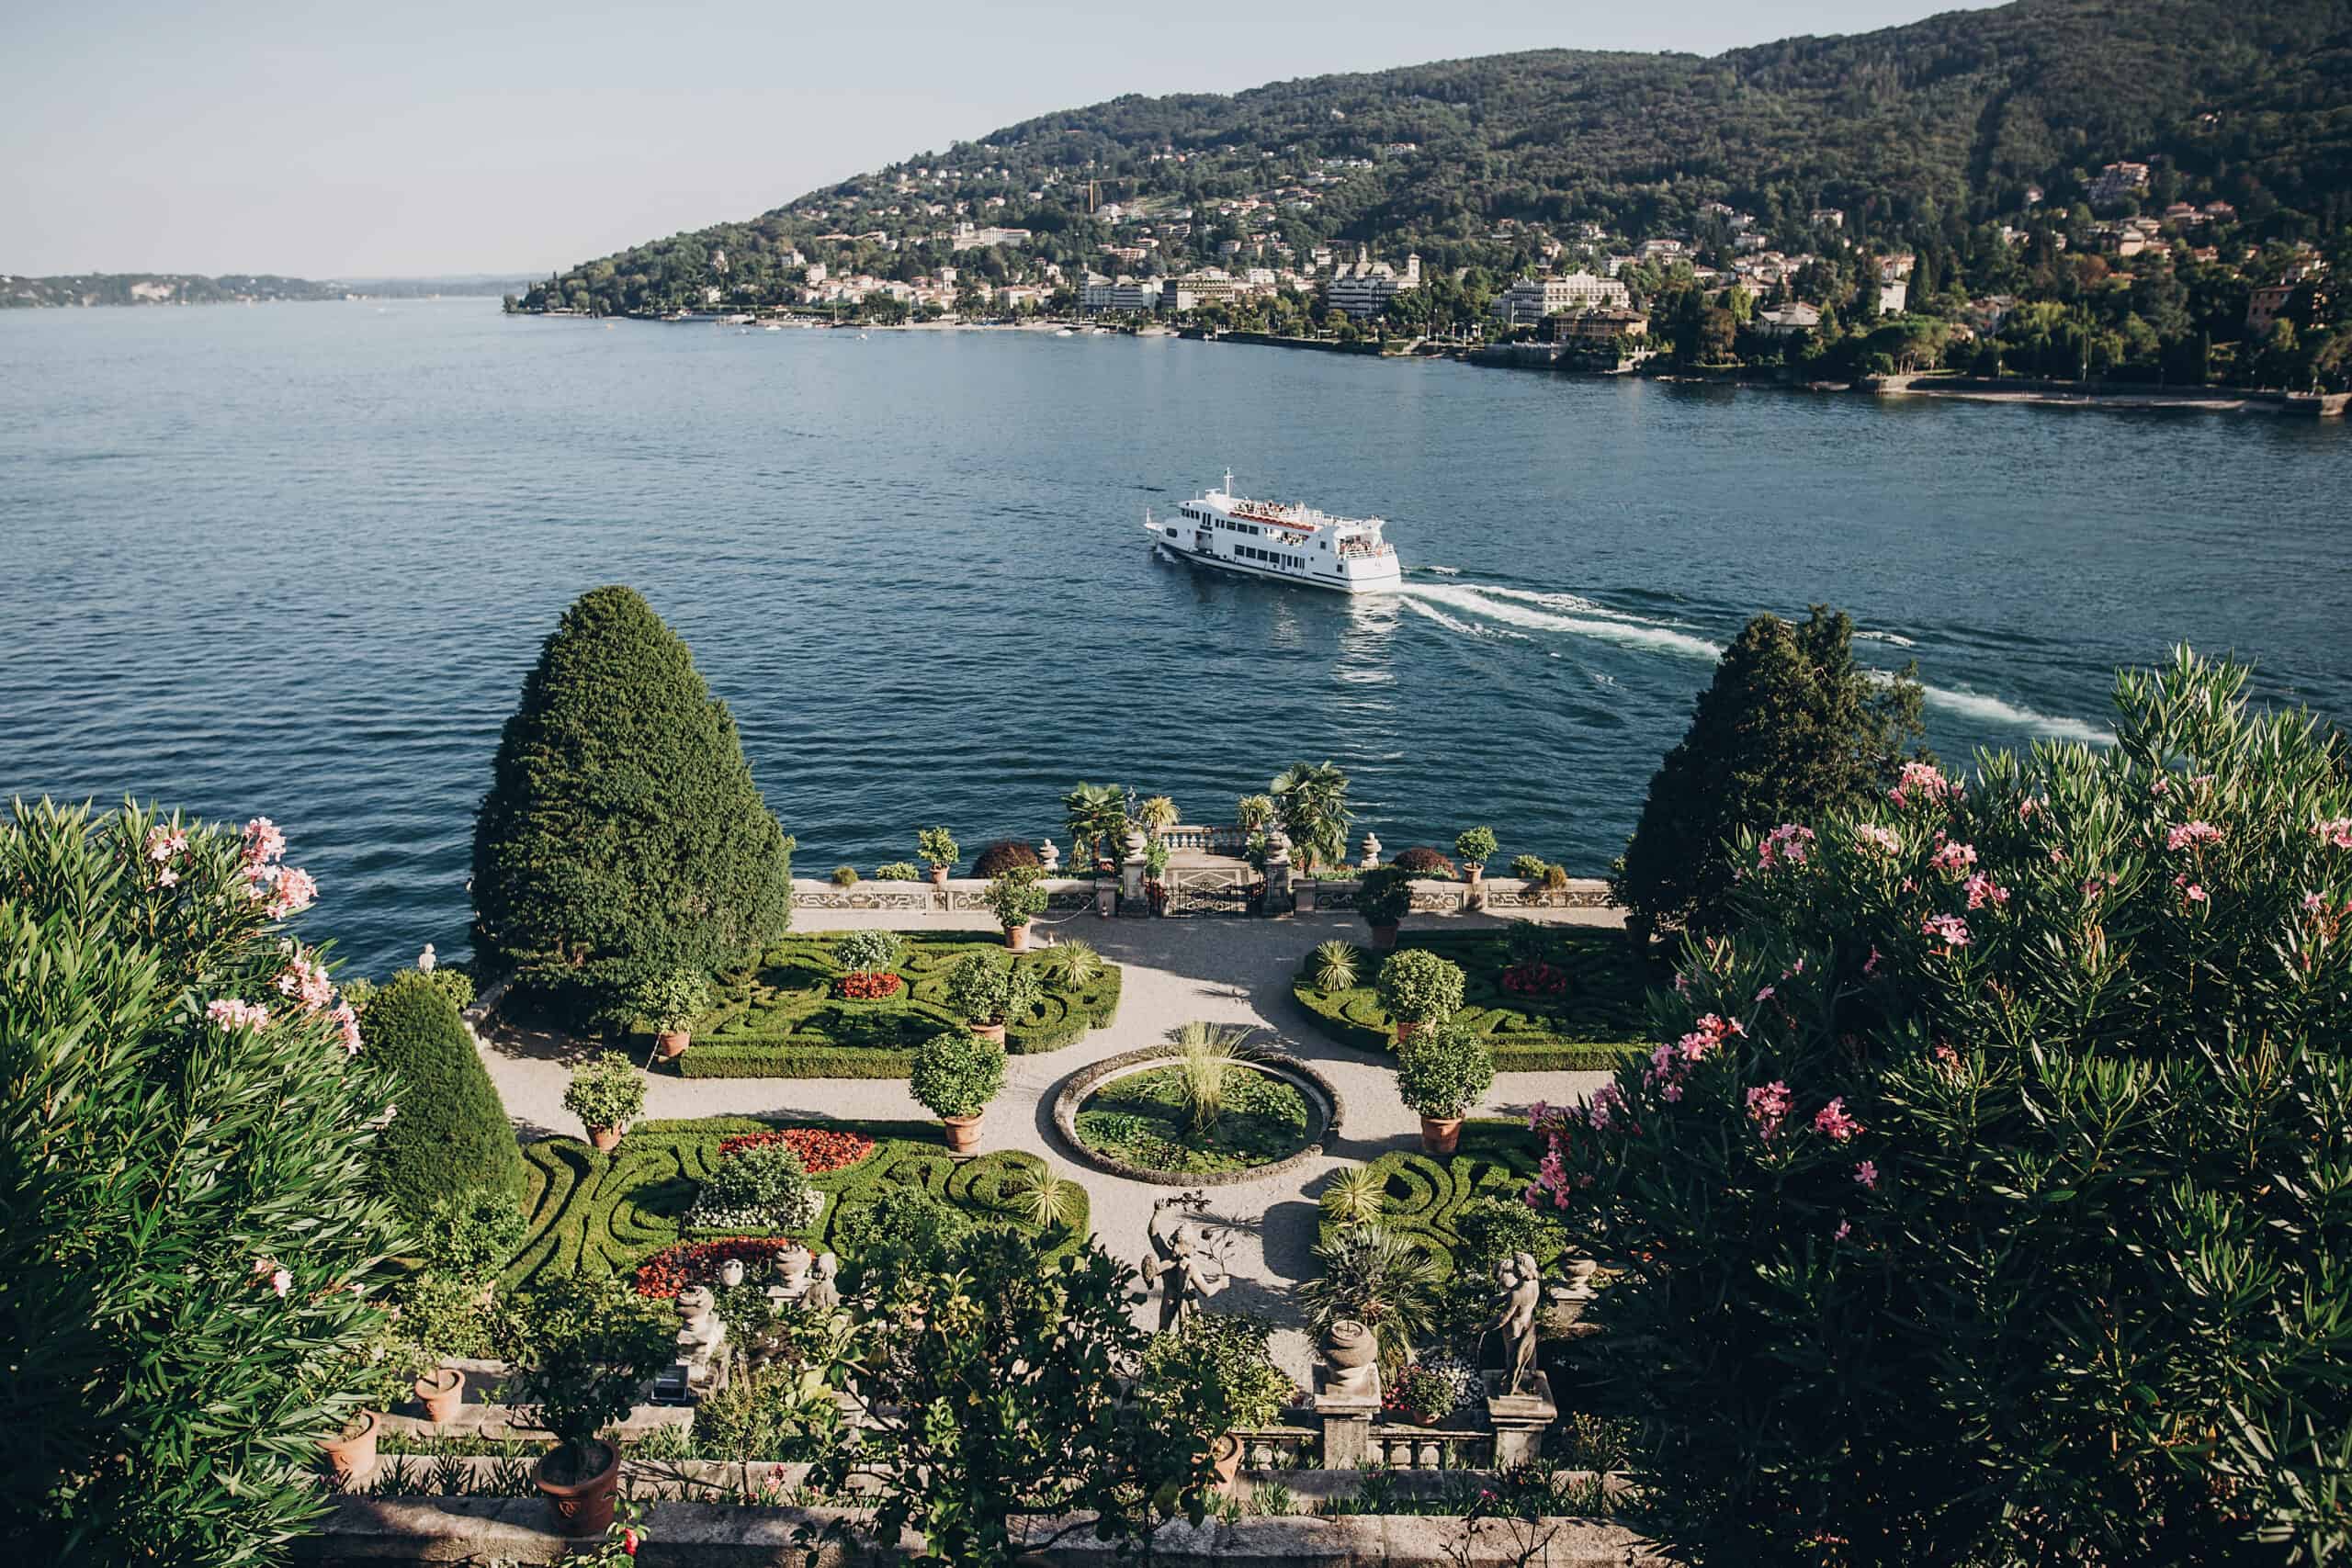 Beautiful view of stone landmarks and green terrace with flowers at  Lago Maggiore with ships and boats, exploring  Borromean Islands, Italy. Exploring old architecture monuments in Stresa